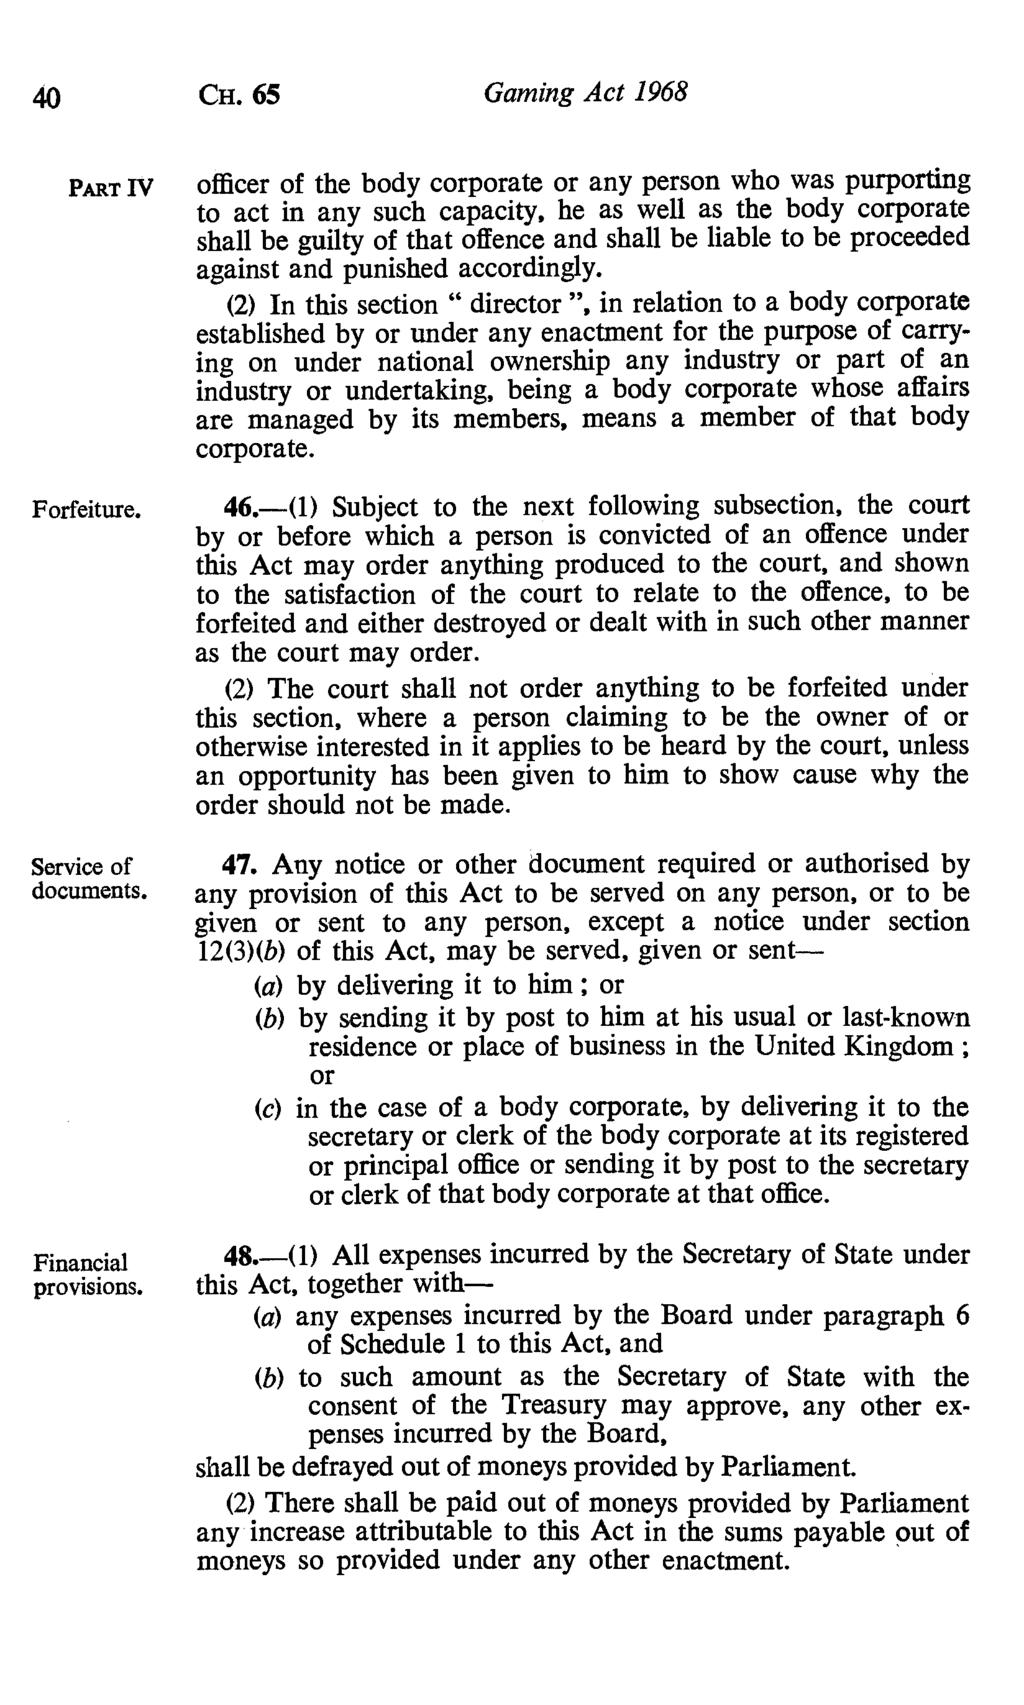 40 CH. 65 Gaming Act 1968 PART IV Forfeiture. Service of documents. Financial provisions.